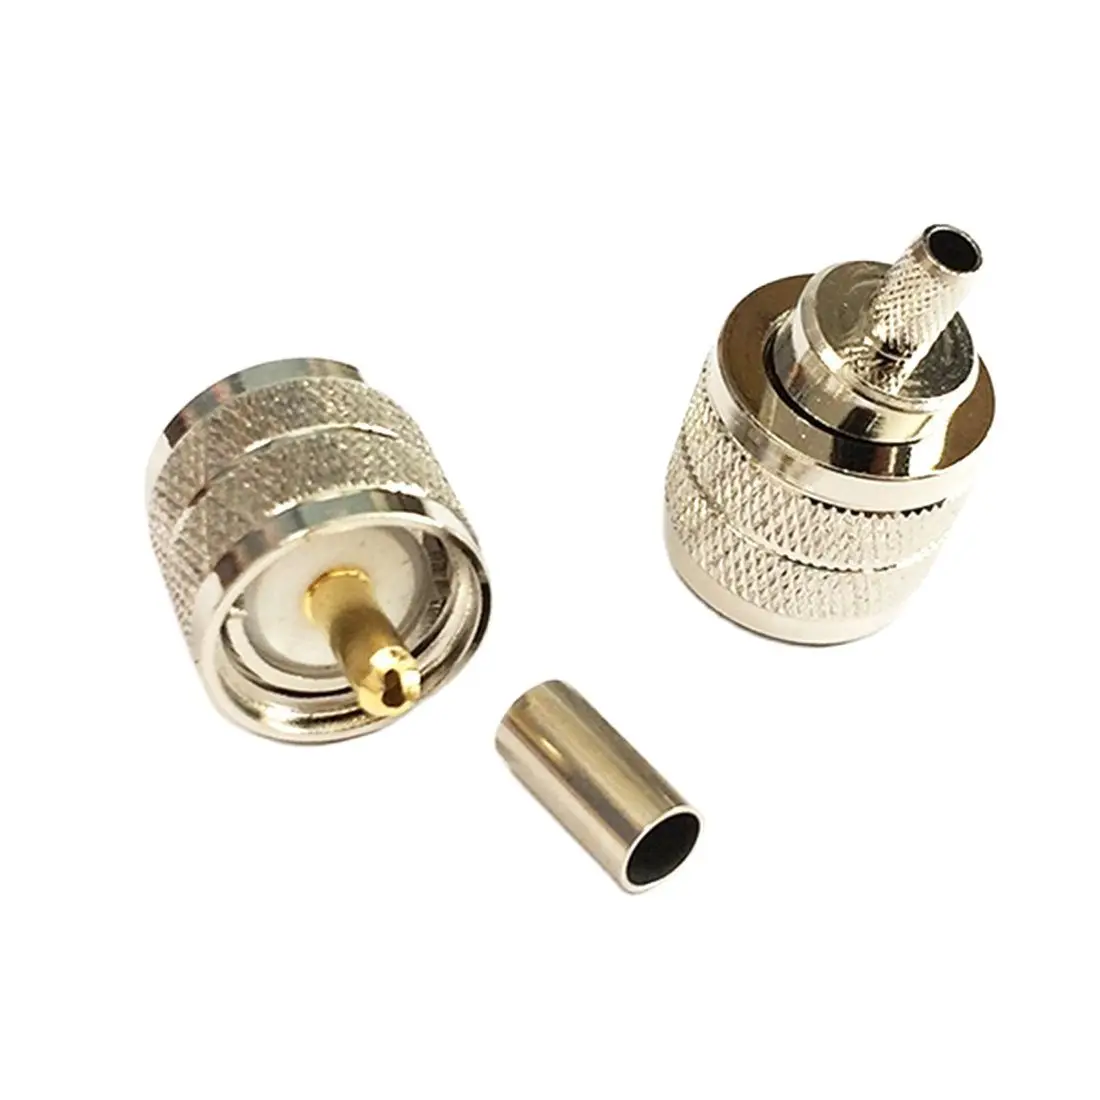 

1PC UHF Male Plug RF Coax Connector Crimp For RG58 RG142 RG400 LMR195 Cable Straight Nickelplated NEW Wholesale